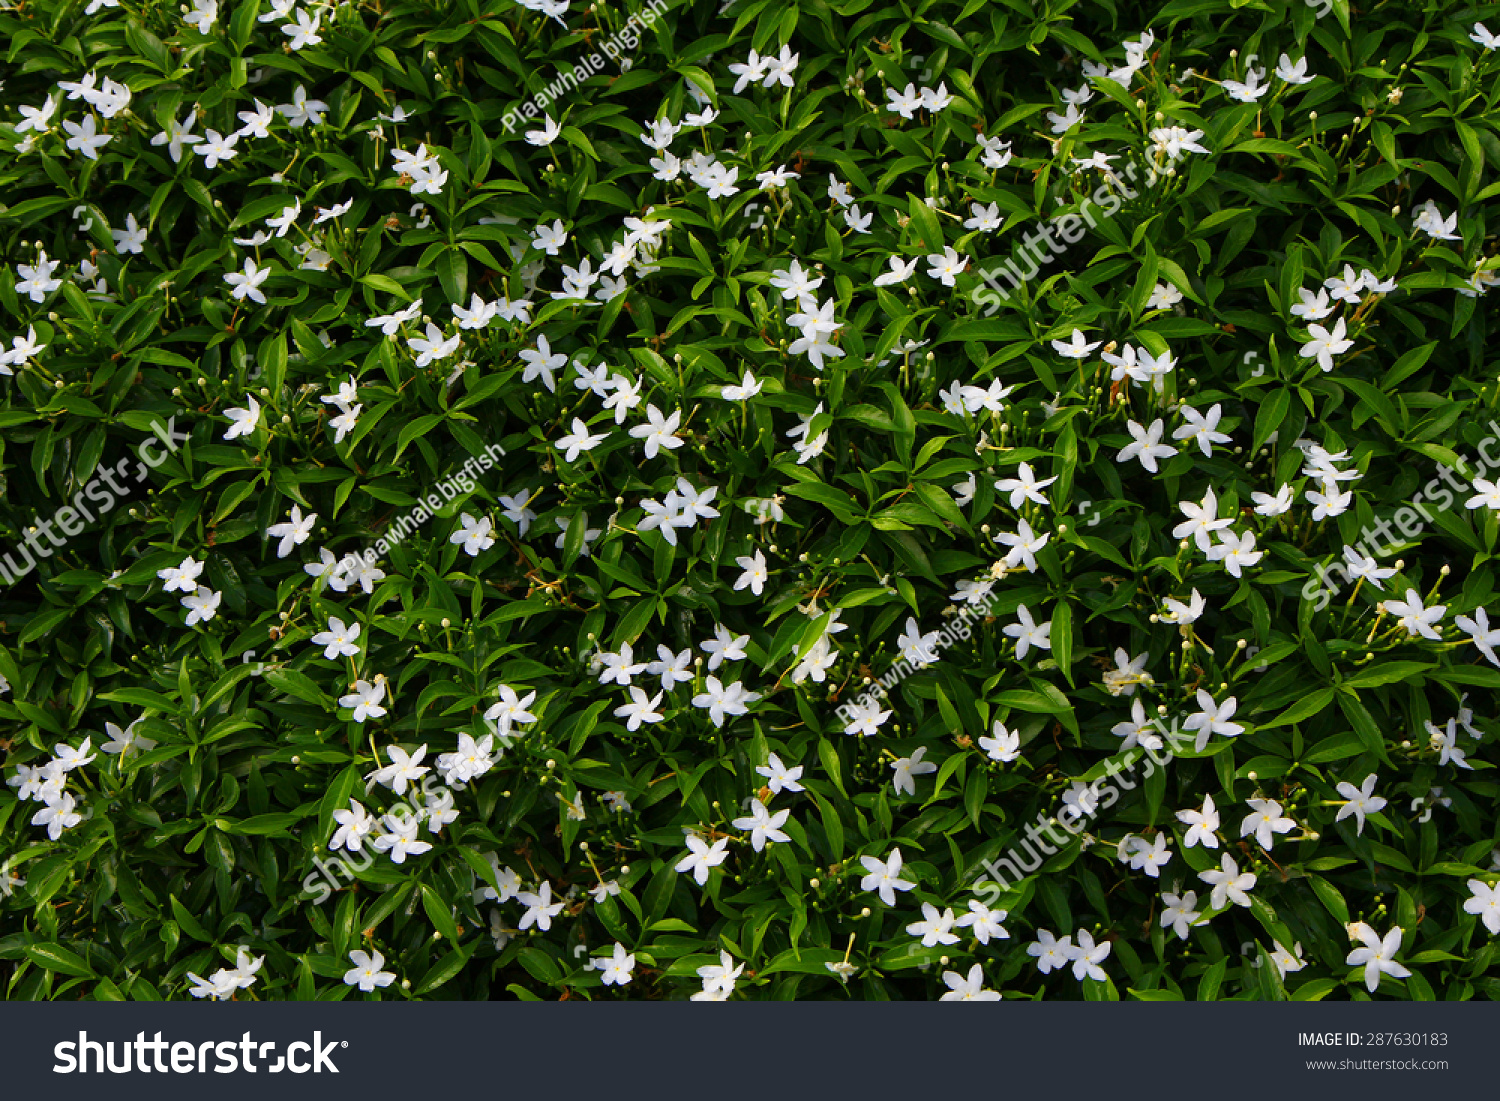 Small White Flowers And Green Leaves Garden Top Royalty Free Stock Photo Avopix Com